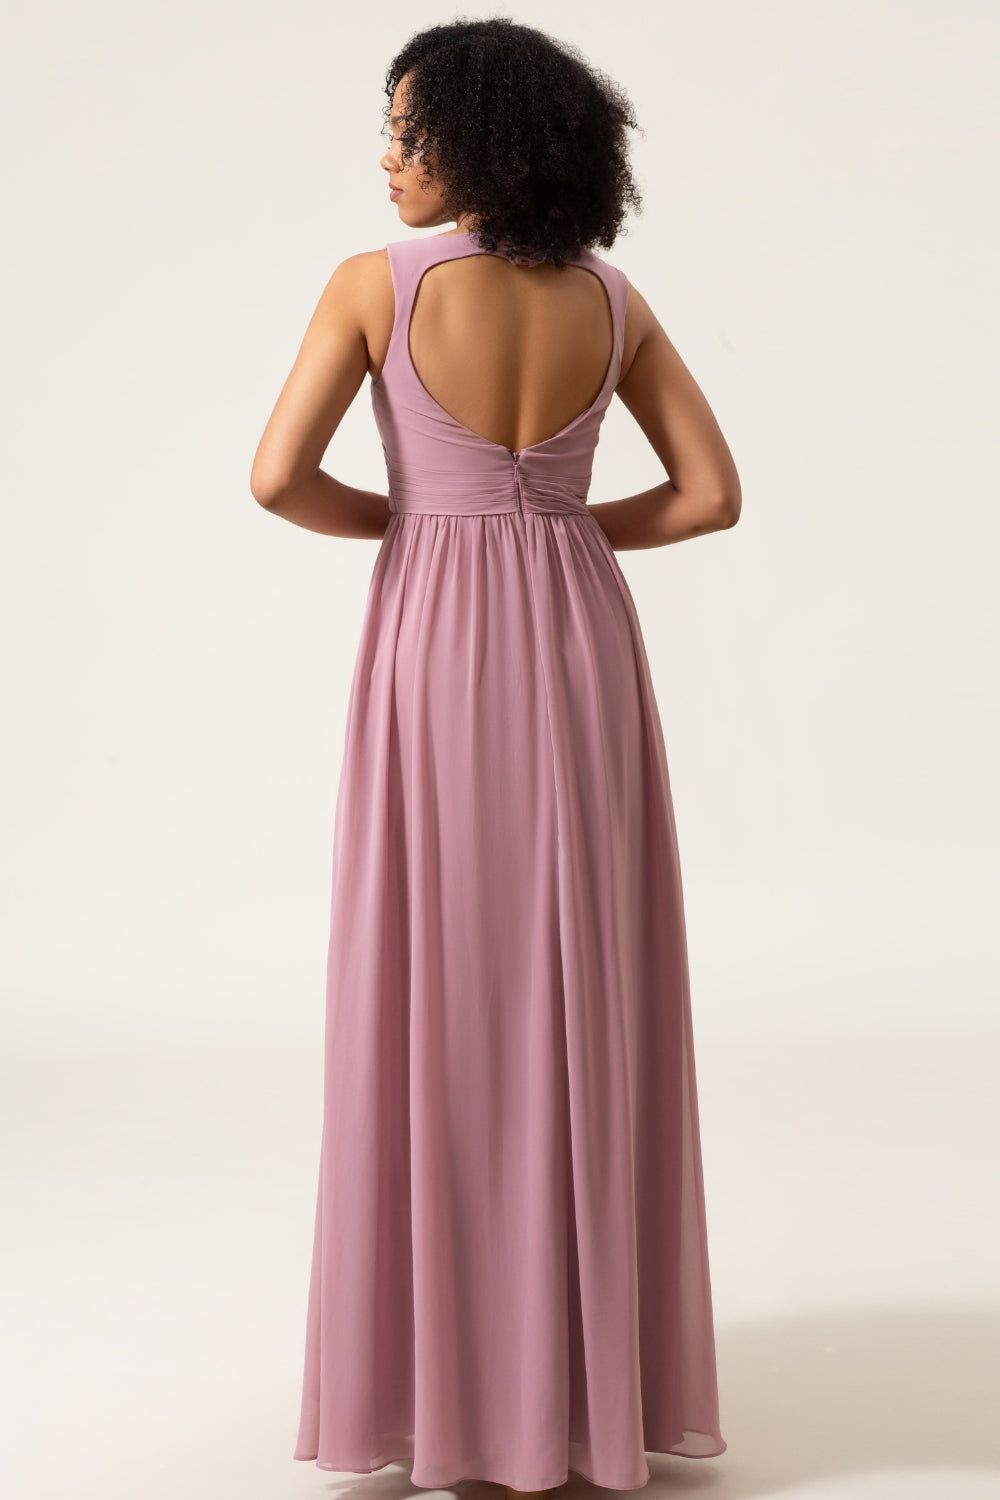 Dusty Rose A-Line Long Chiffon Bridesmaid Dress with Heart Shaped Open Back